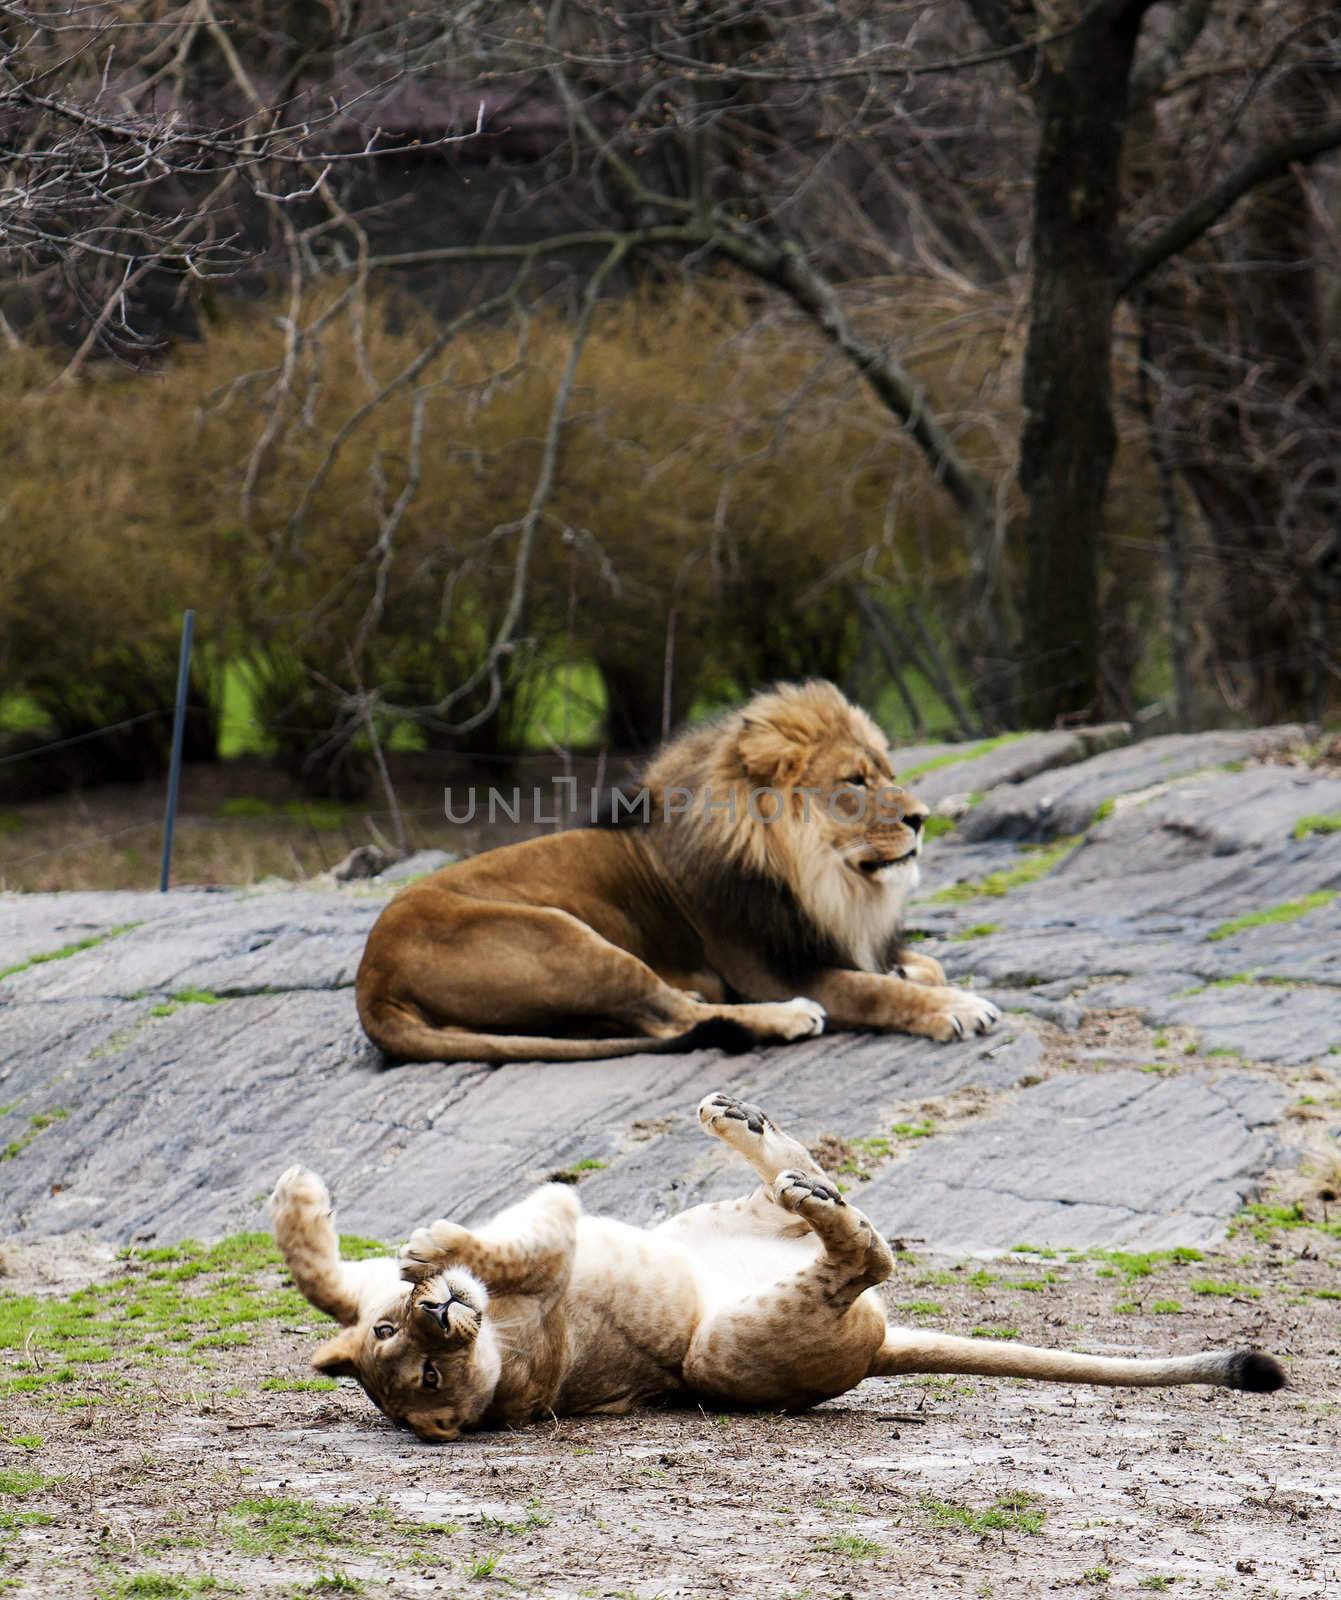 Lioness rolling on sand for her lion who lays on a rock.